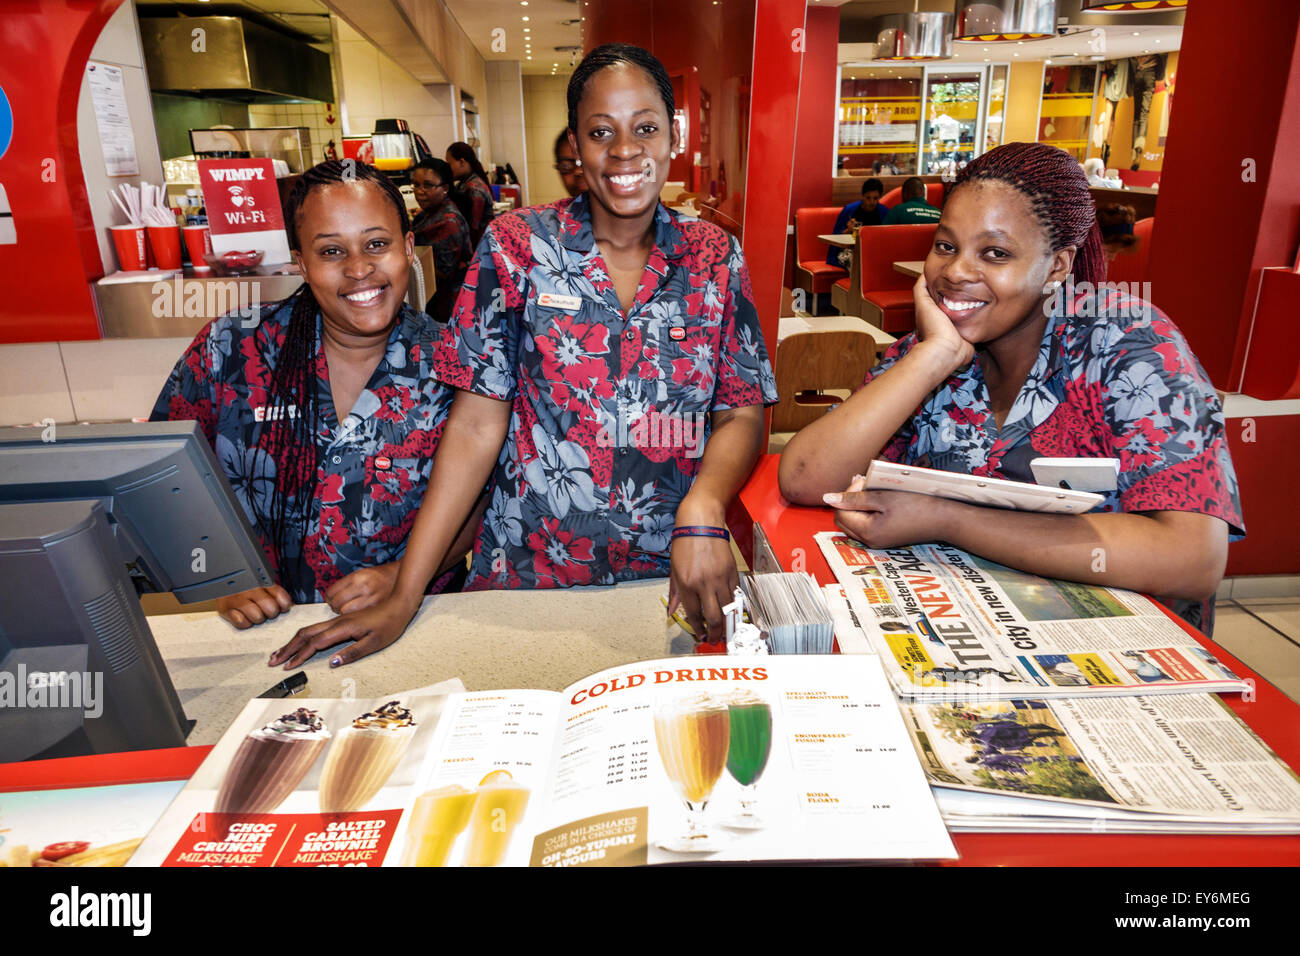 Cape Town South Africa,City Centre,center,St. George's Mall,Wimpy,restaurant restaurants food dining cafe cafes,interior inside,counter,Black woman fe Stock Photo